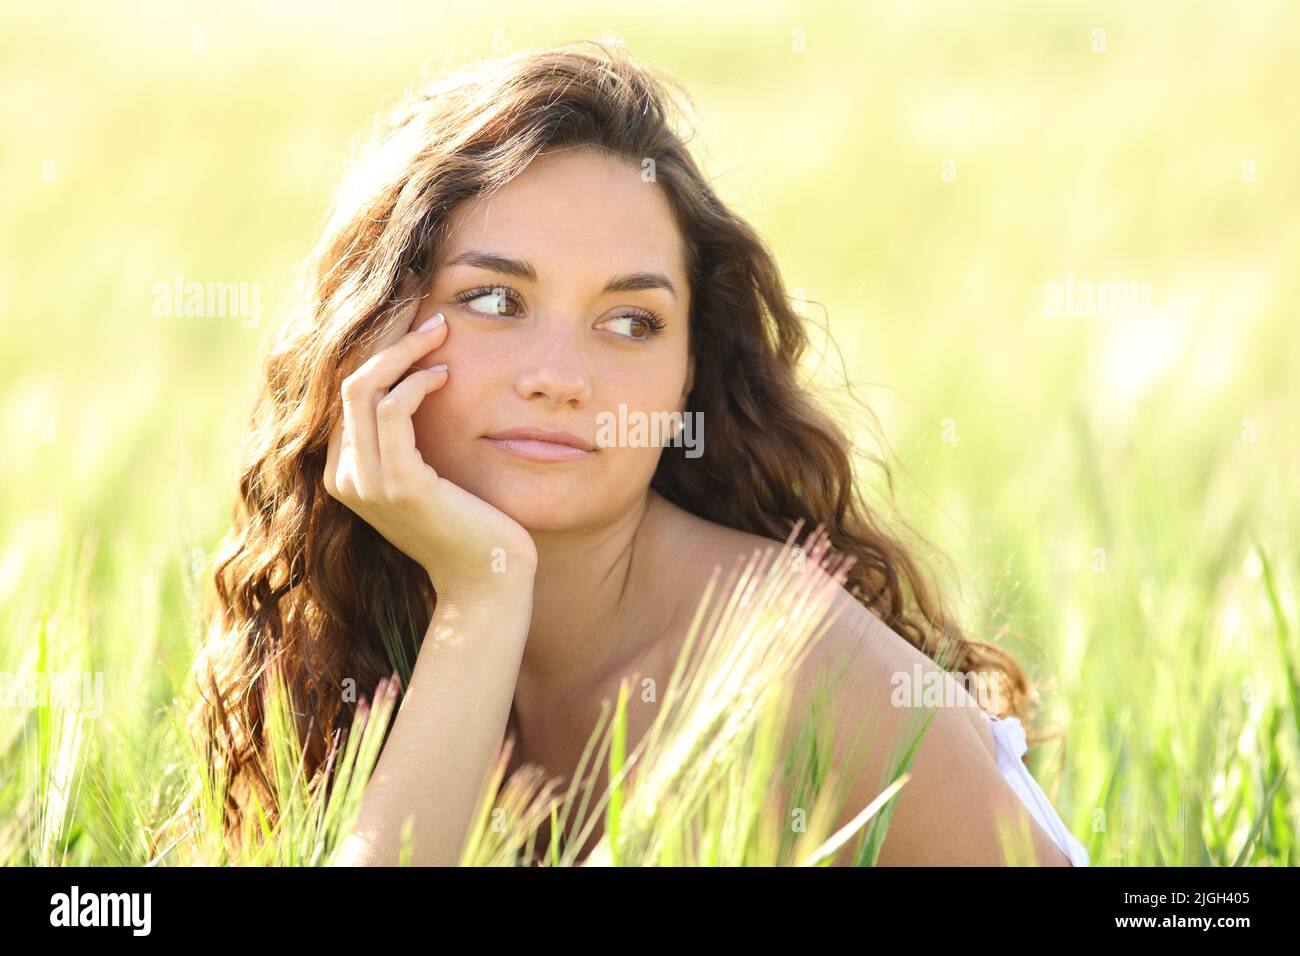 Portrait of a beautiful woman looking at side in a wheat field Stock Photo